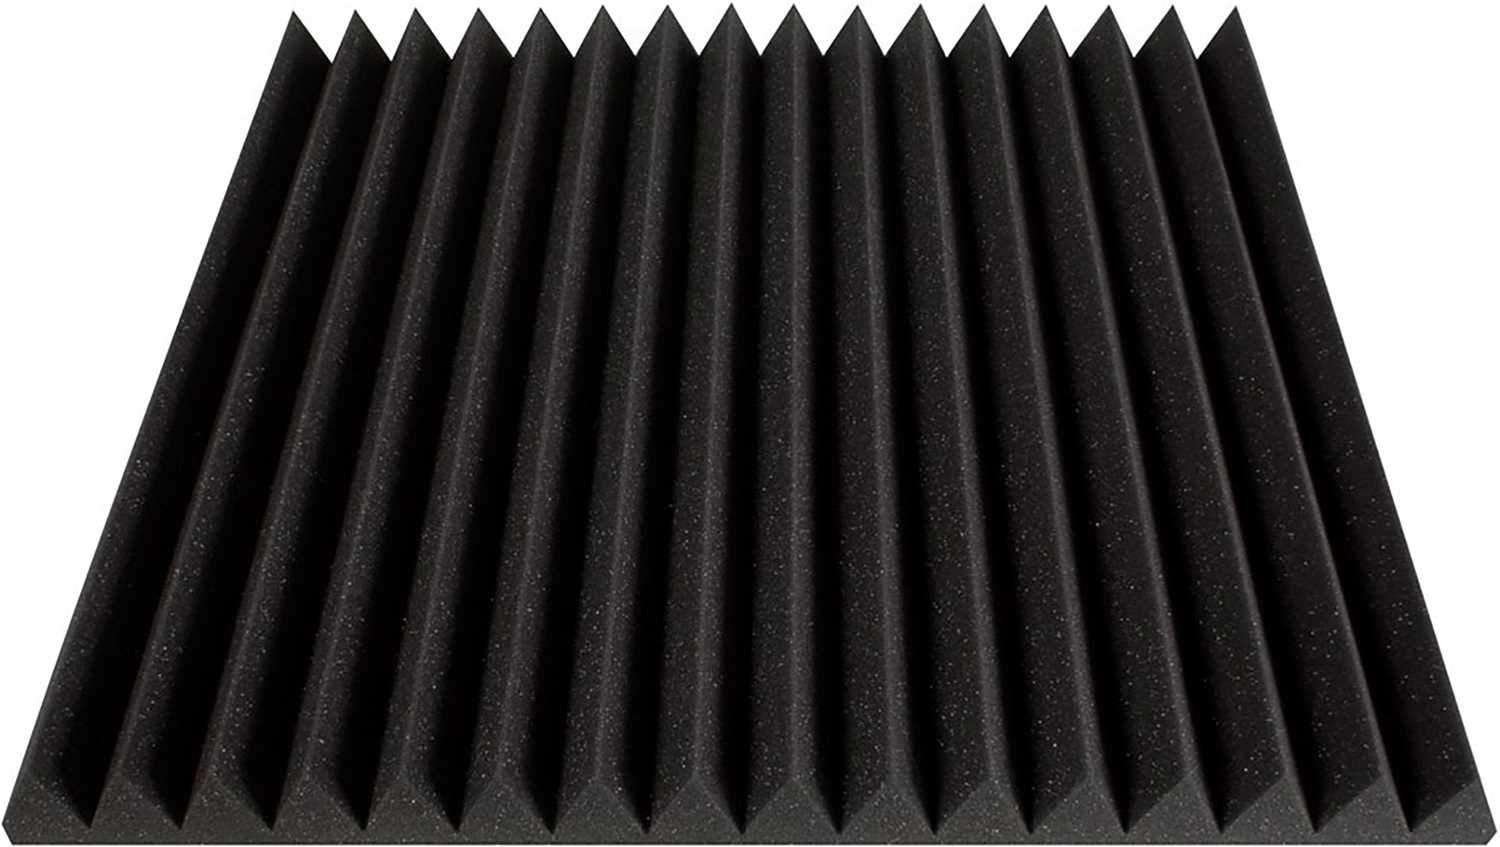 Ultimate Acoustics 24x24 Charcoal Wedge Panel 12-Pack - PSSL ProSound and Stage Lighting